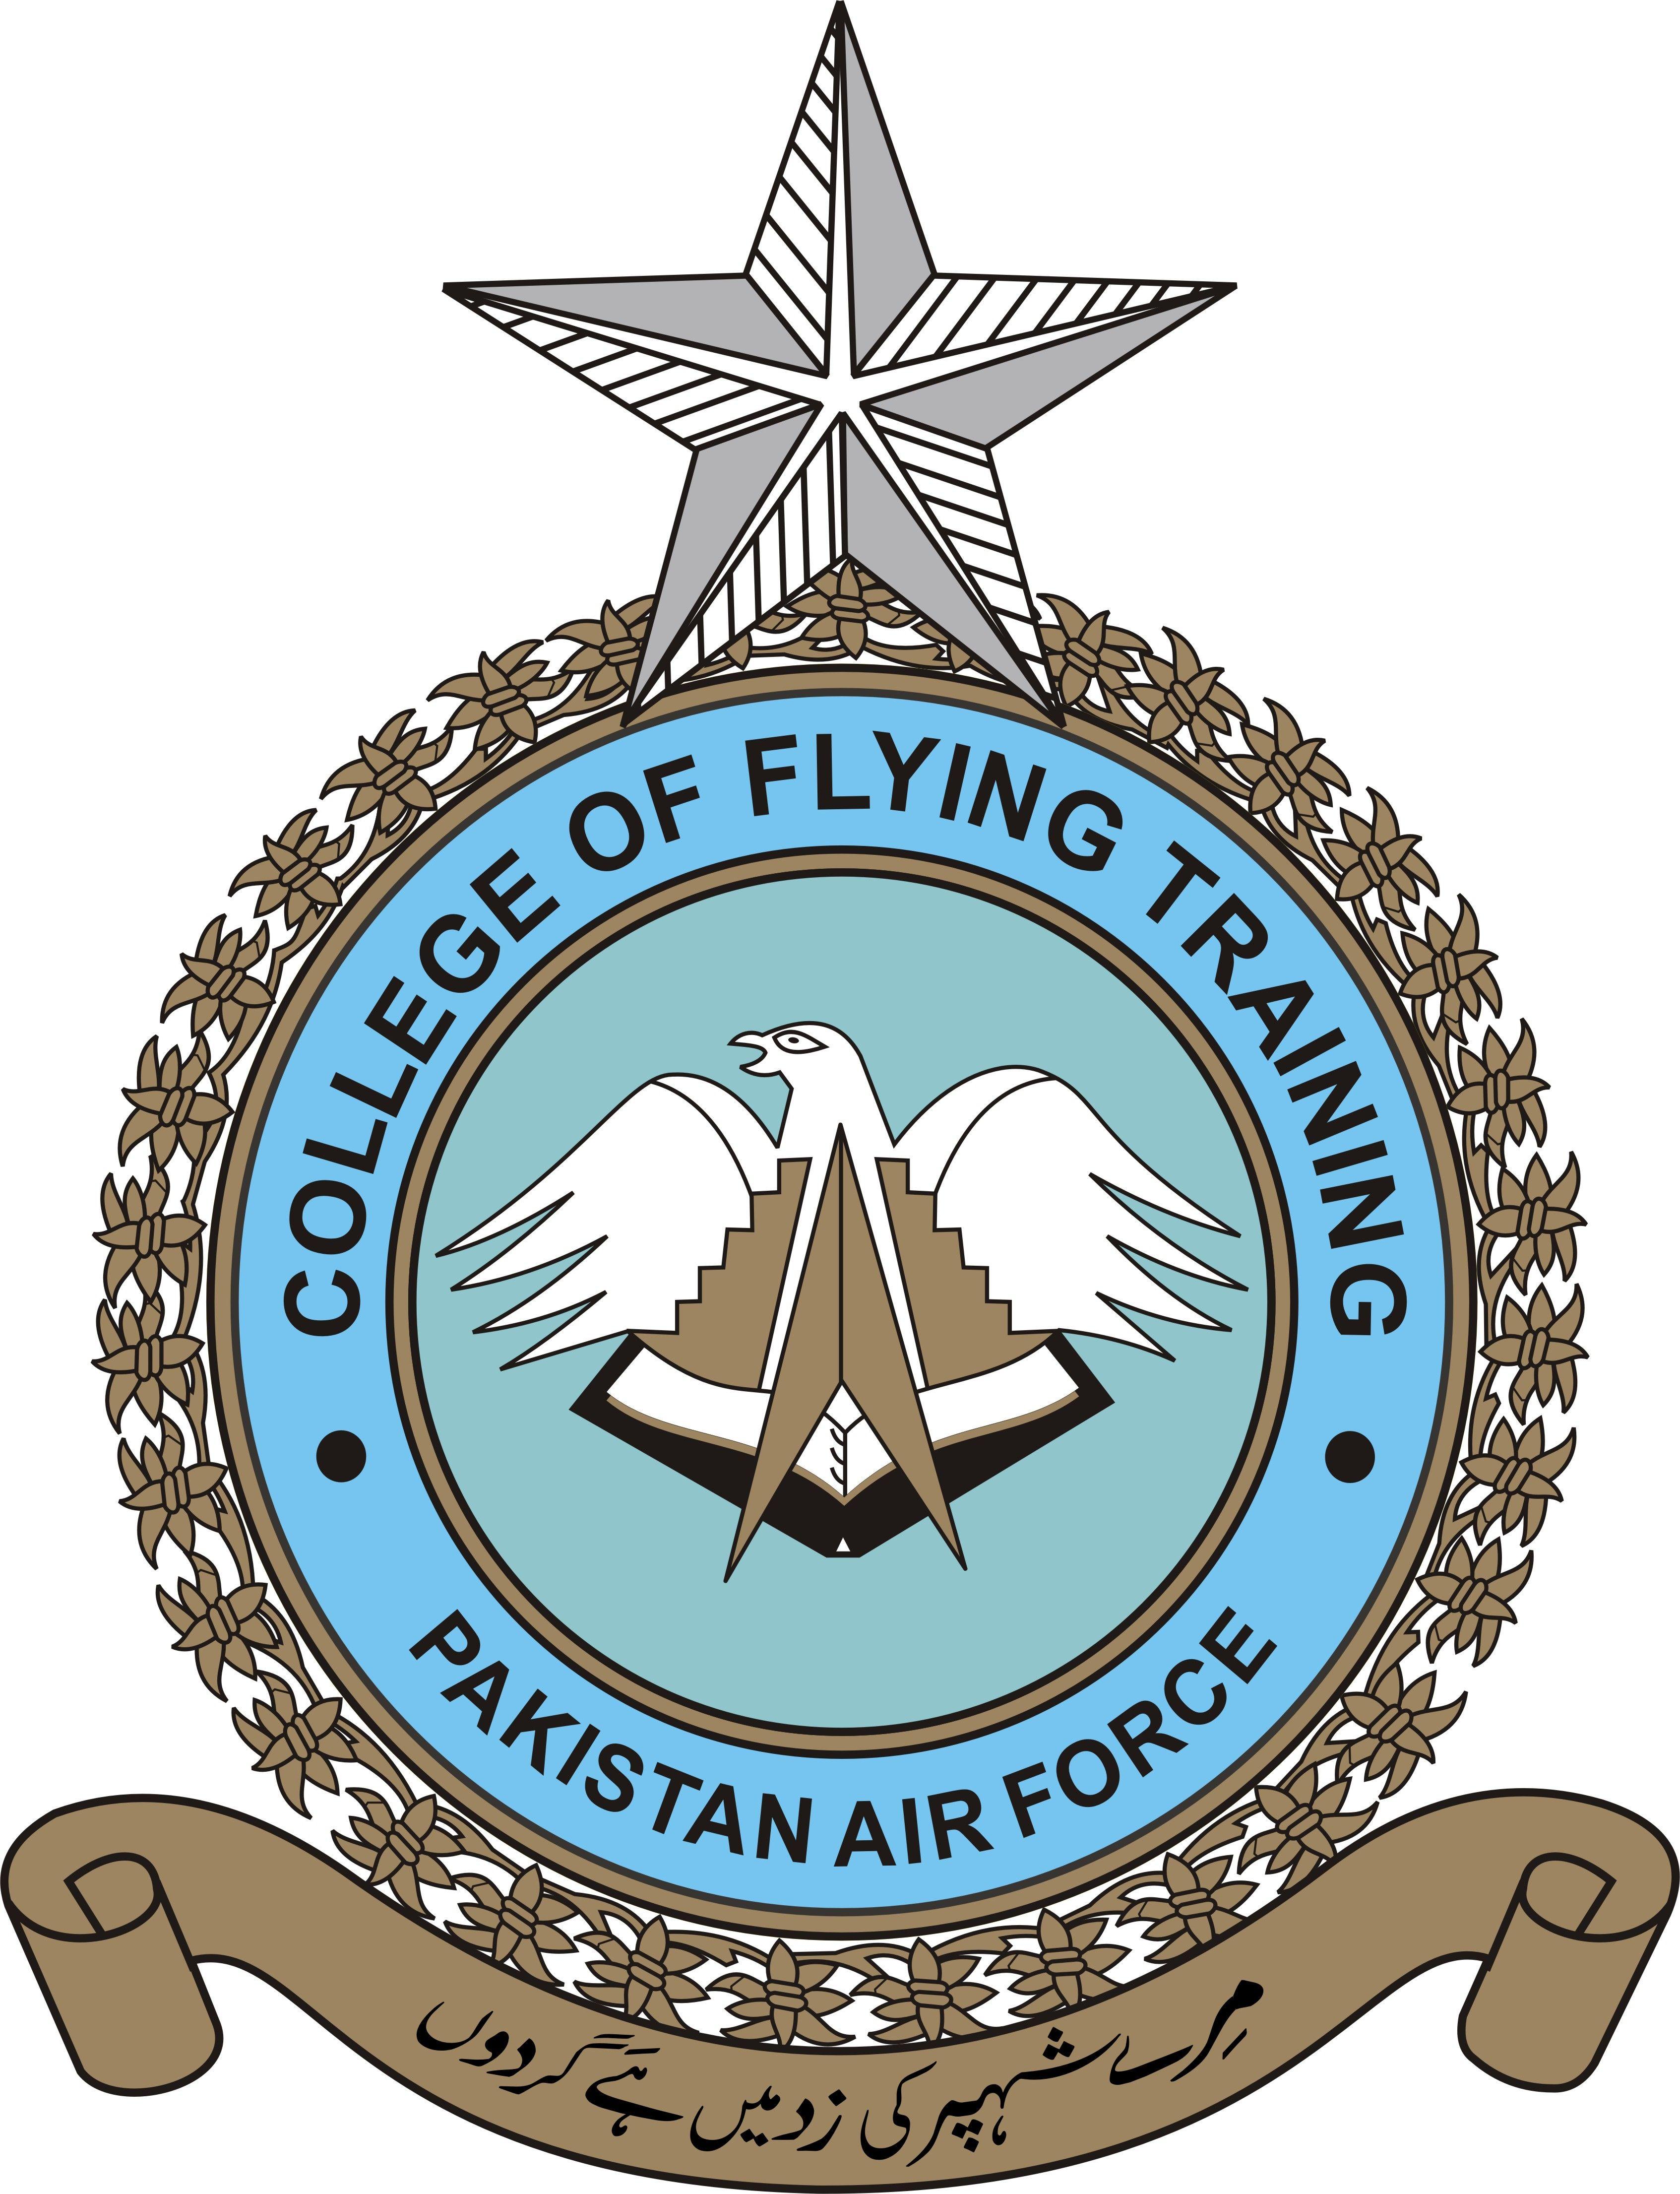 PAF Logo - College of Flying Training Air Force